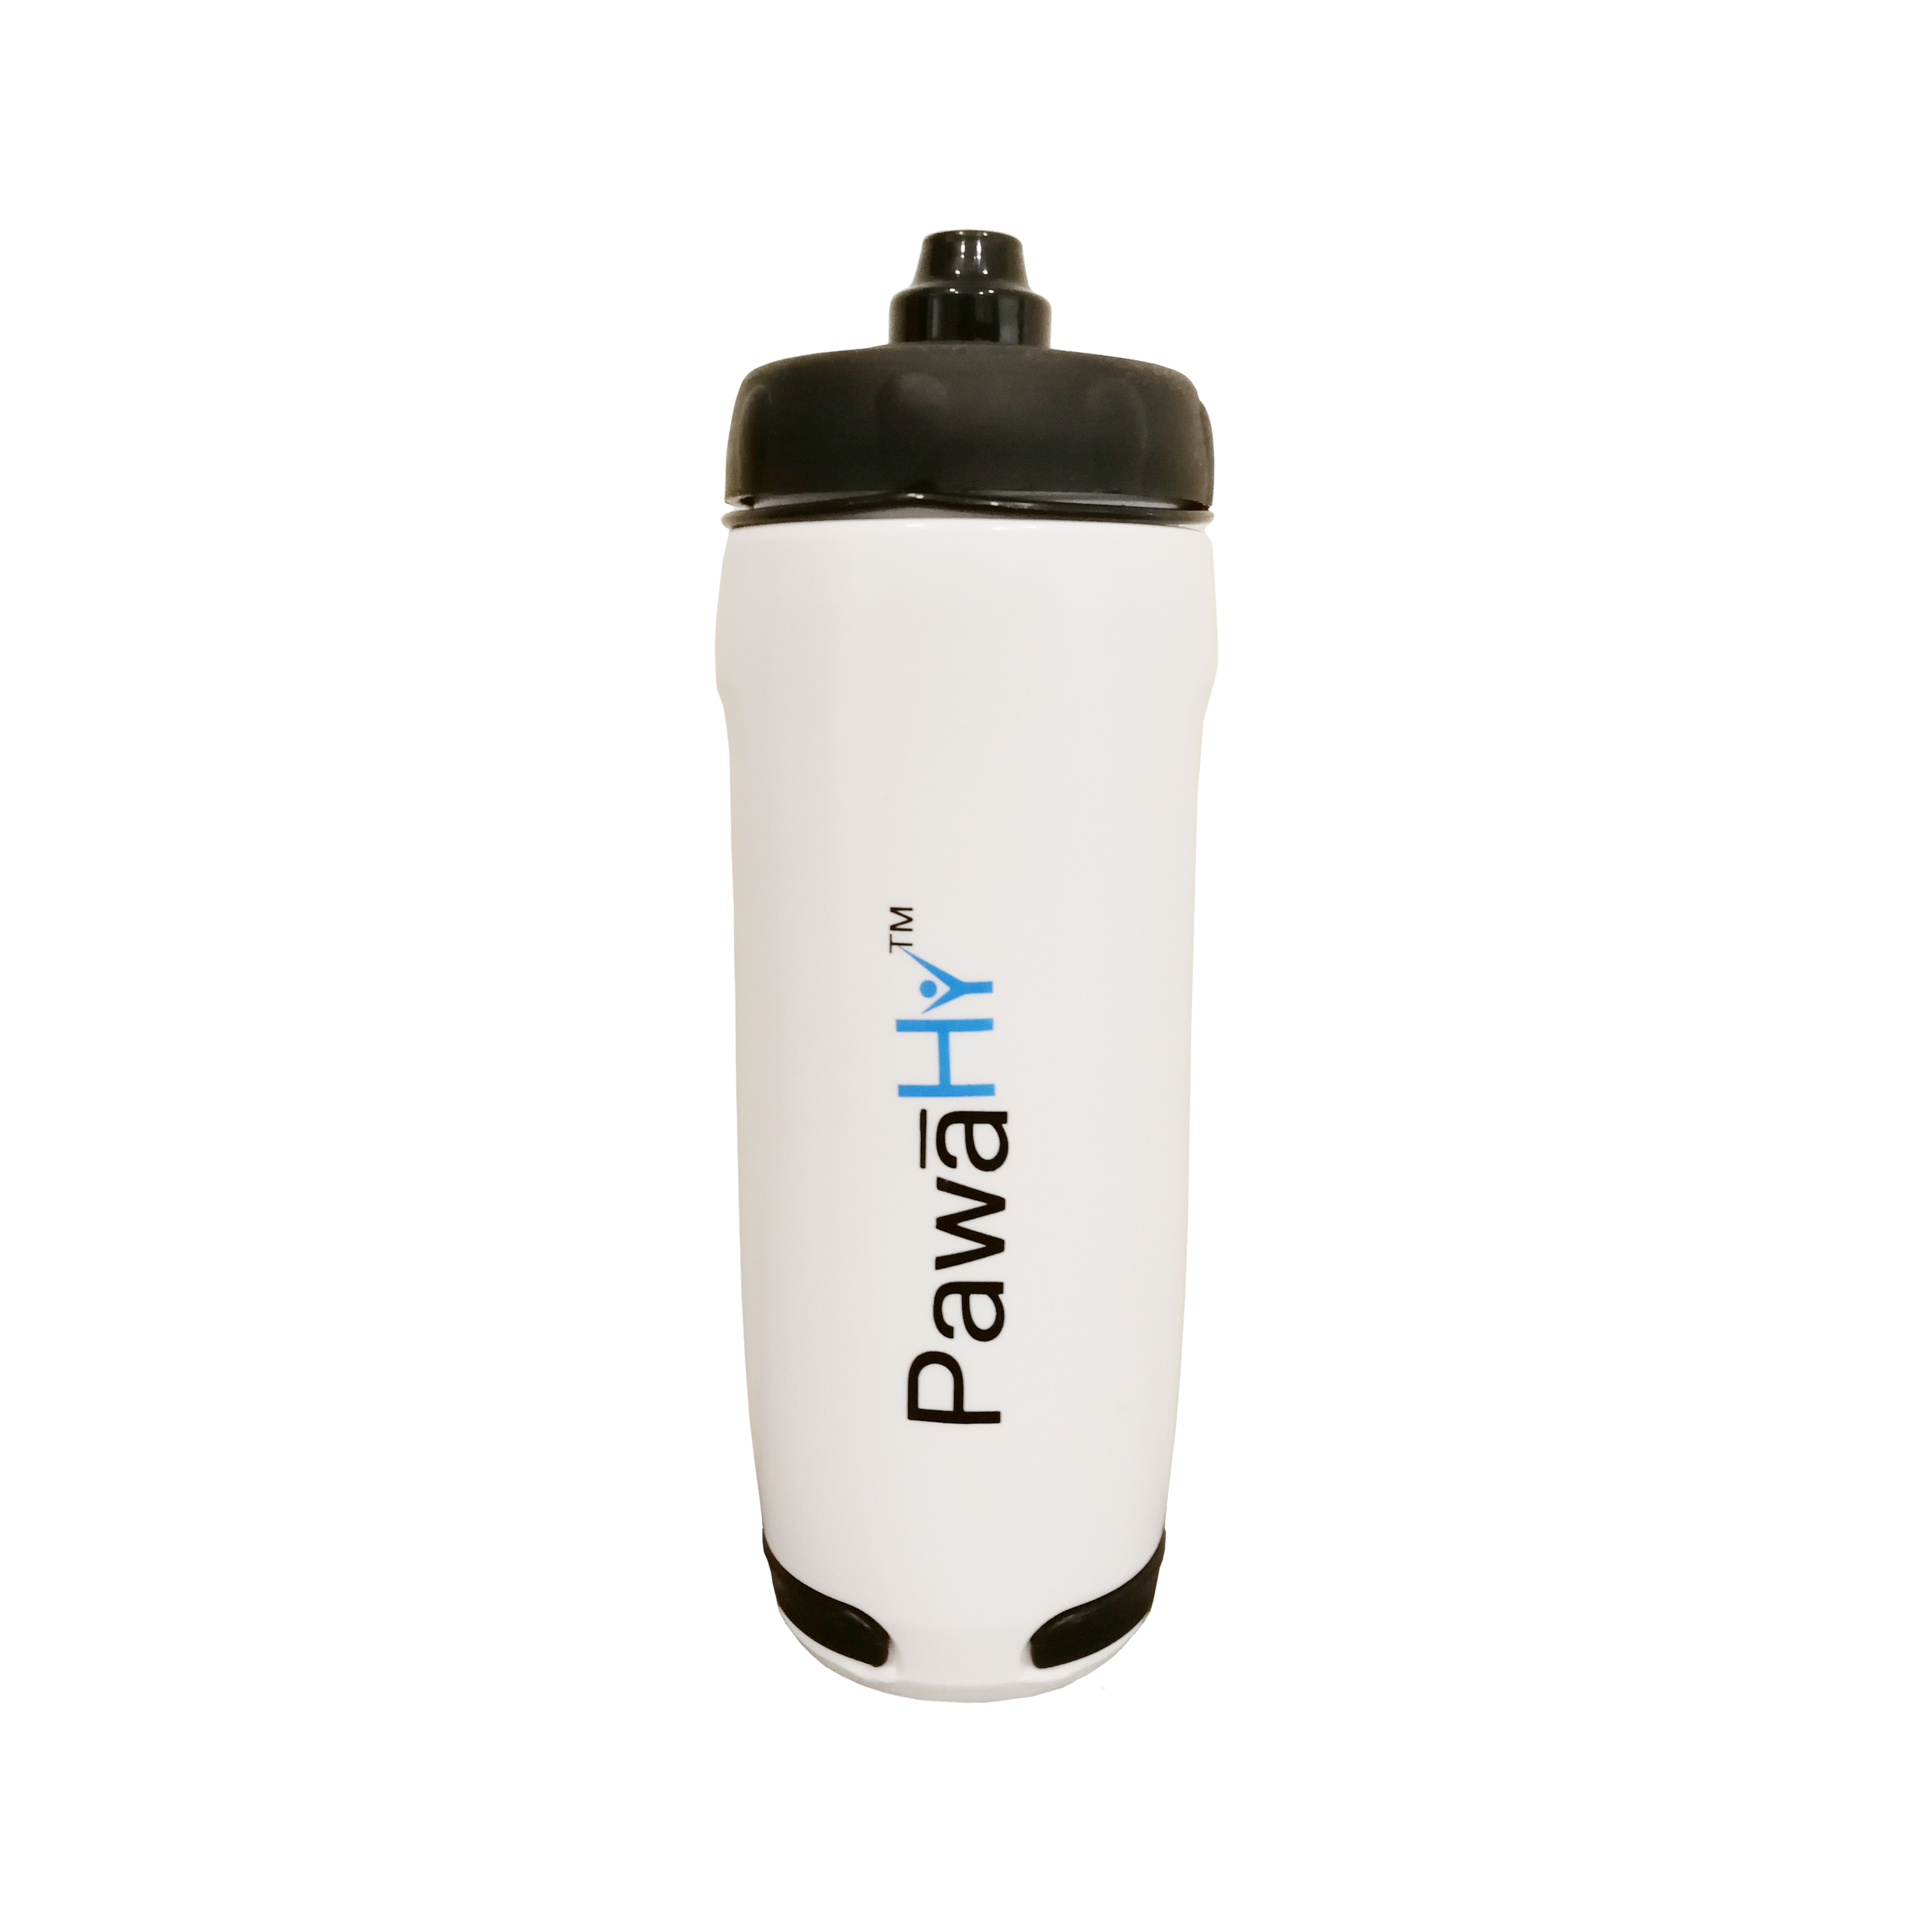 PawaHy Handheld Bottle For Cyclists, Runners, Marathoners & Other Outdoor Sports (White Color, 400ml)